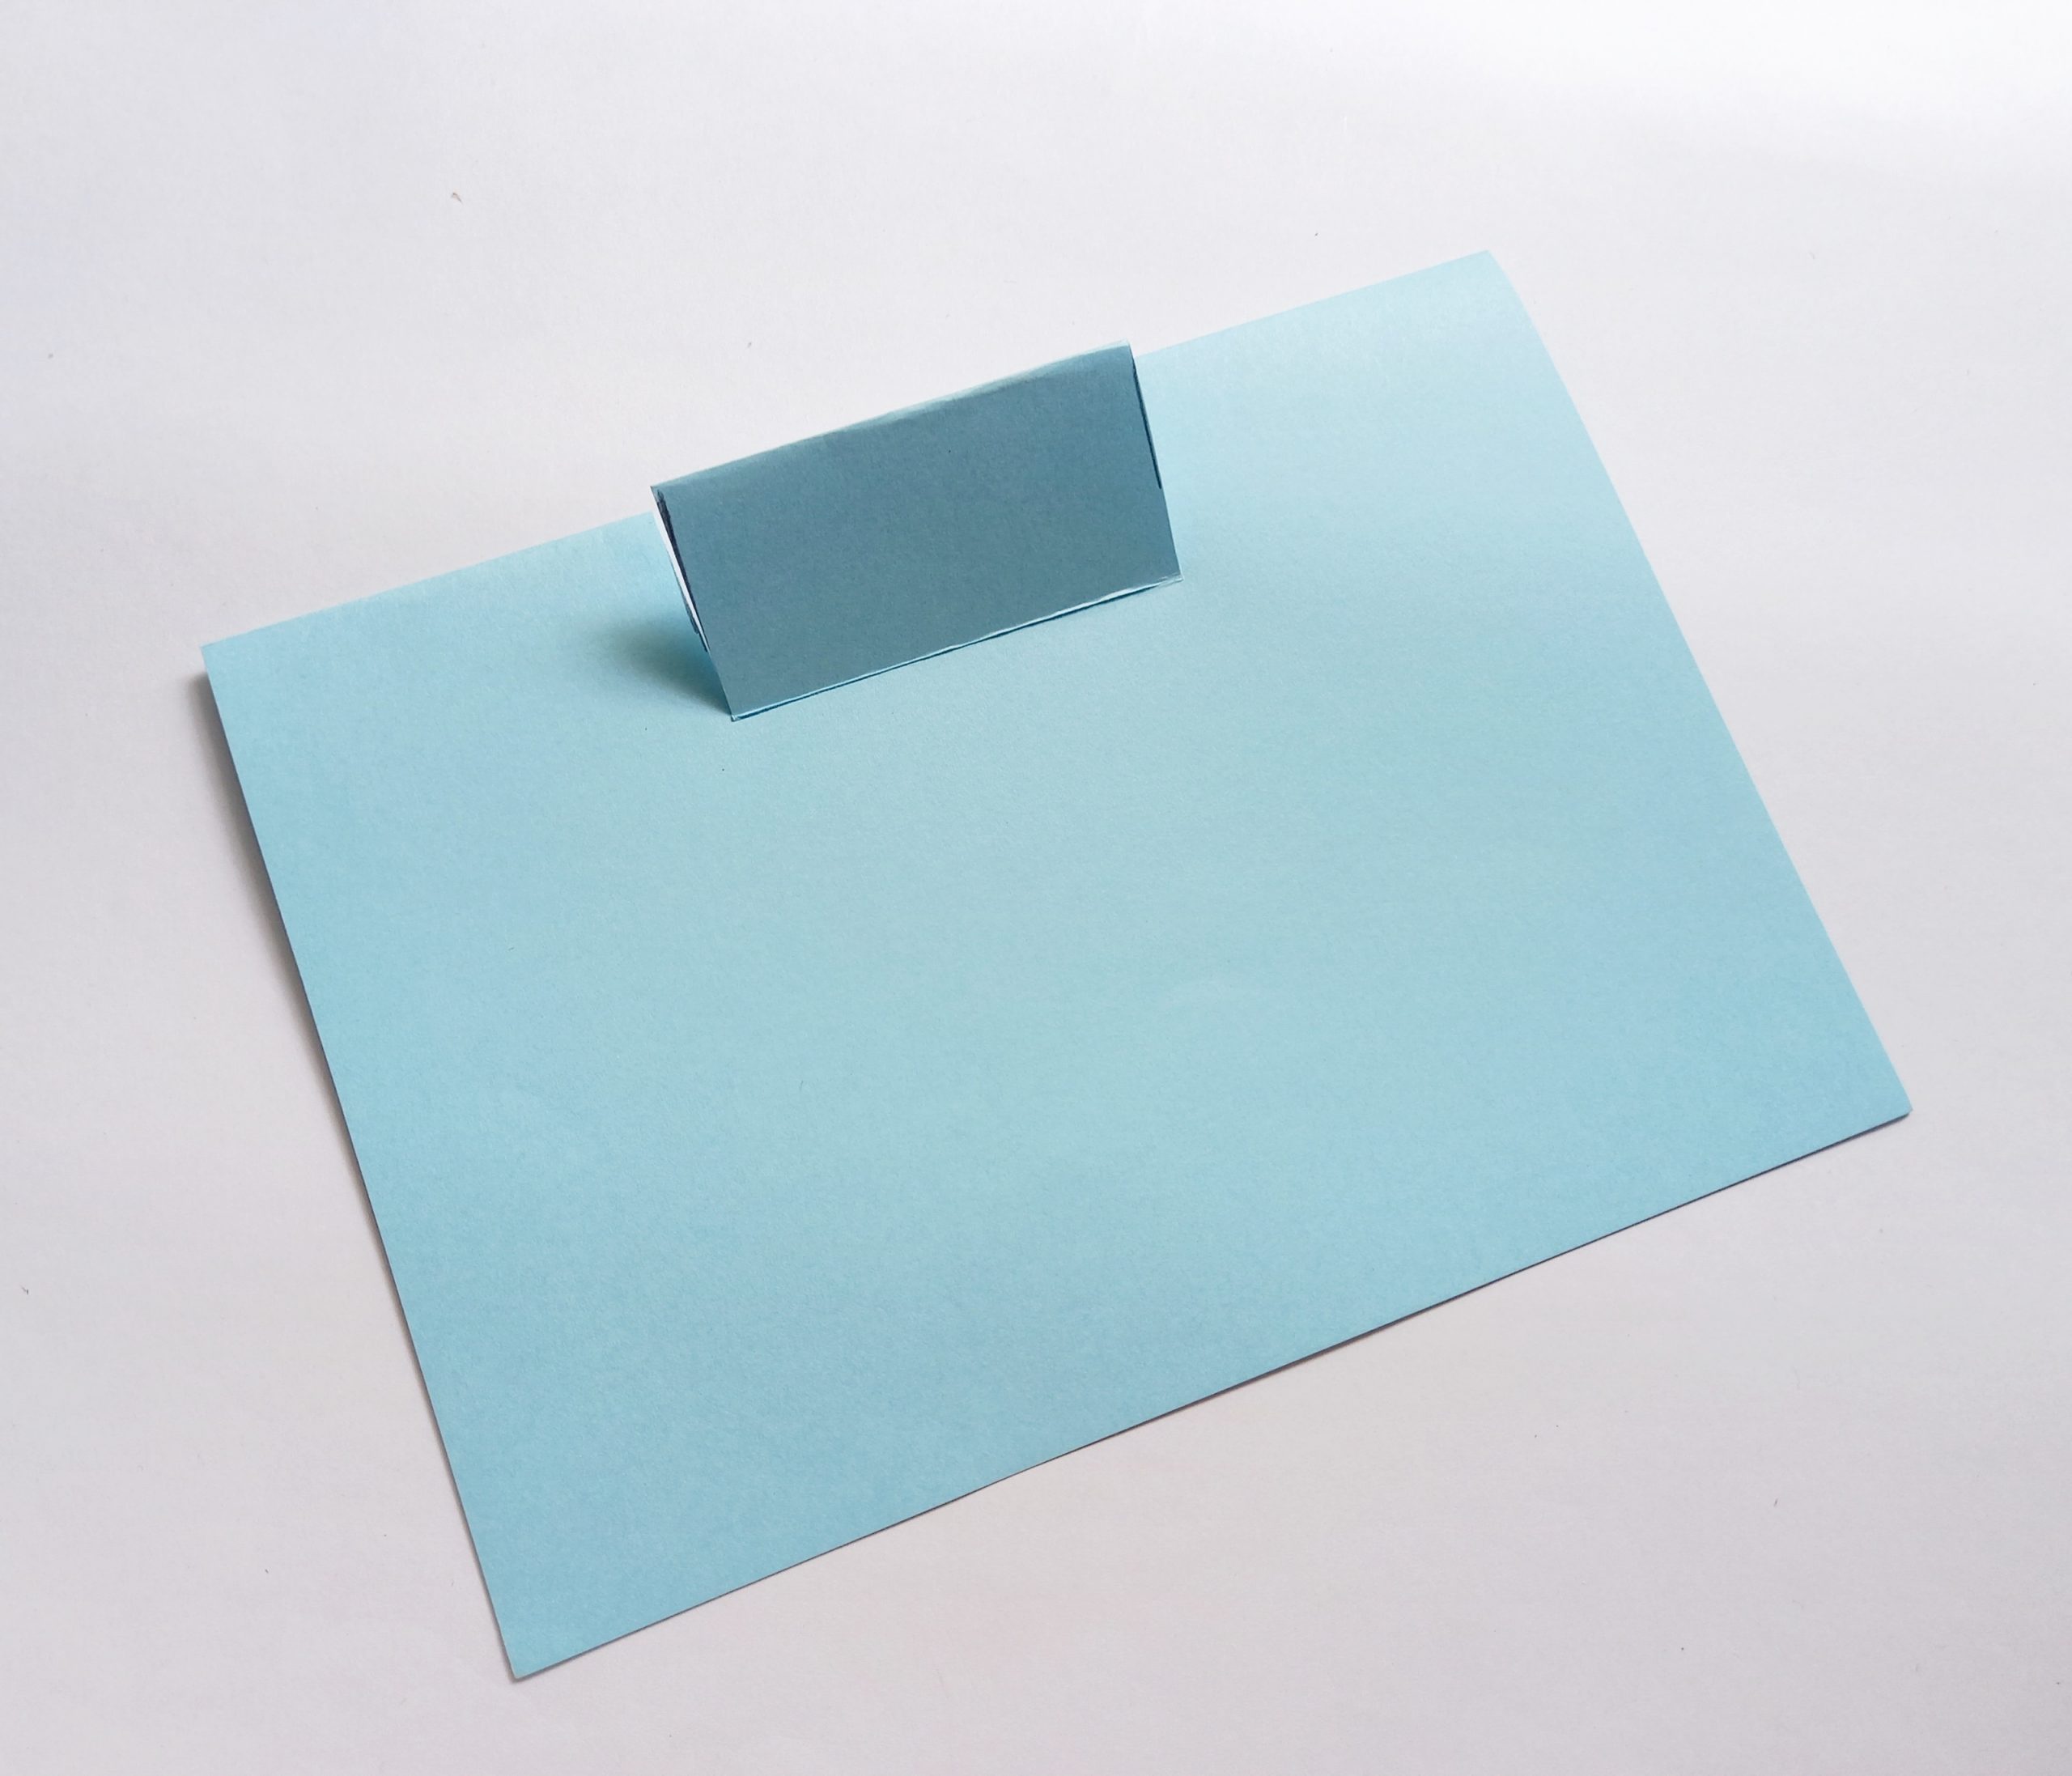 how to make pop up card instructions